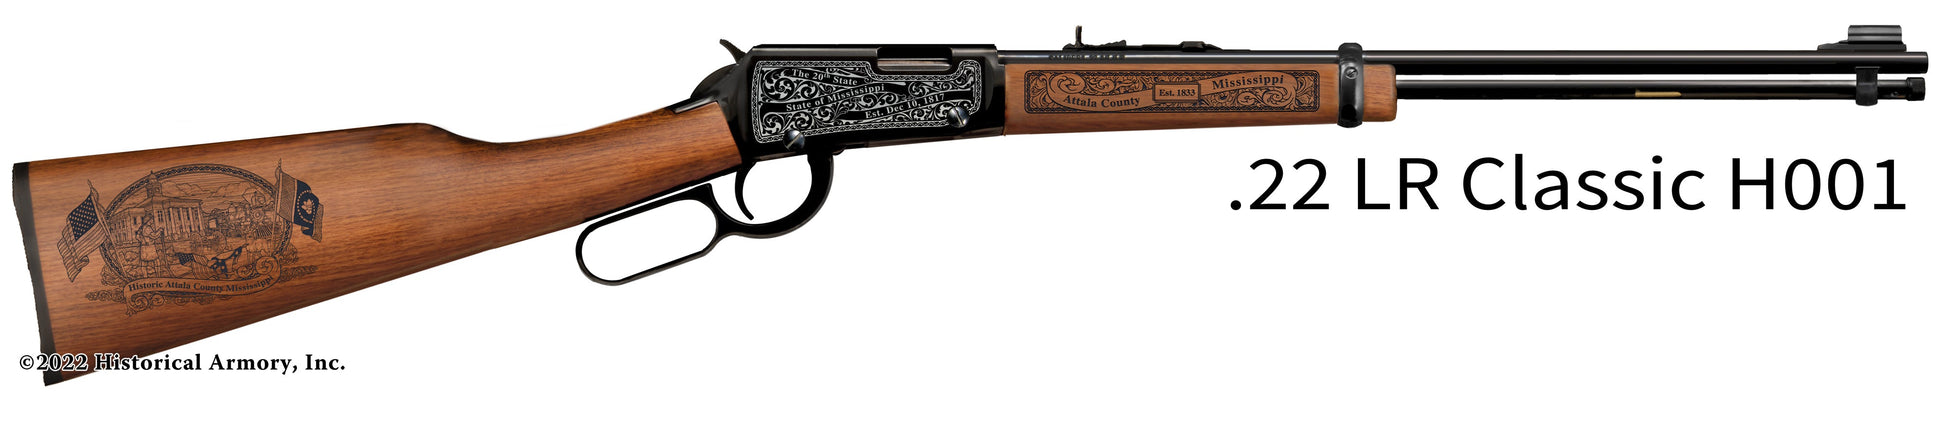 Attala County Mississippi Engraved Henry H001 Rifle